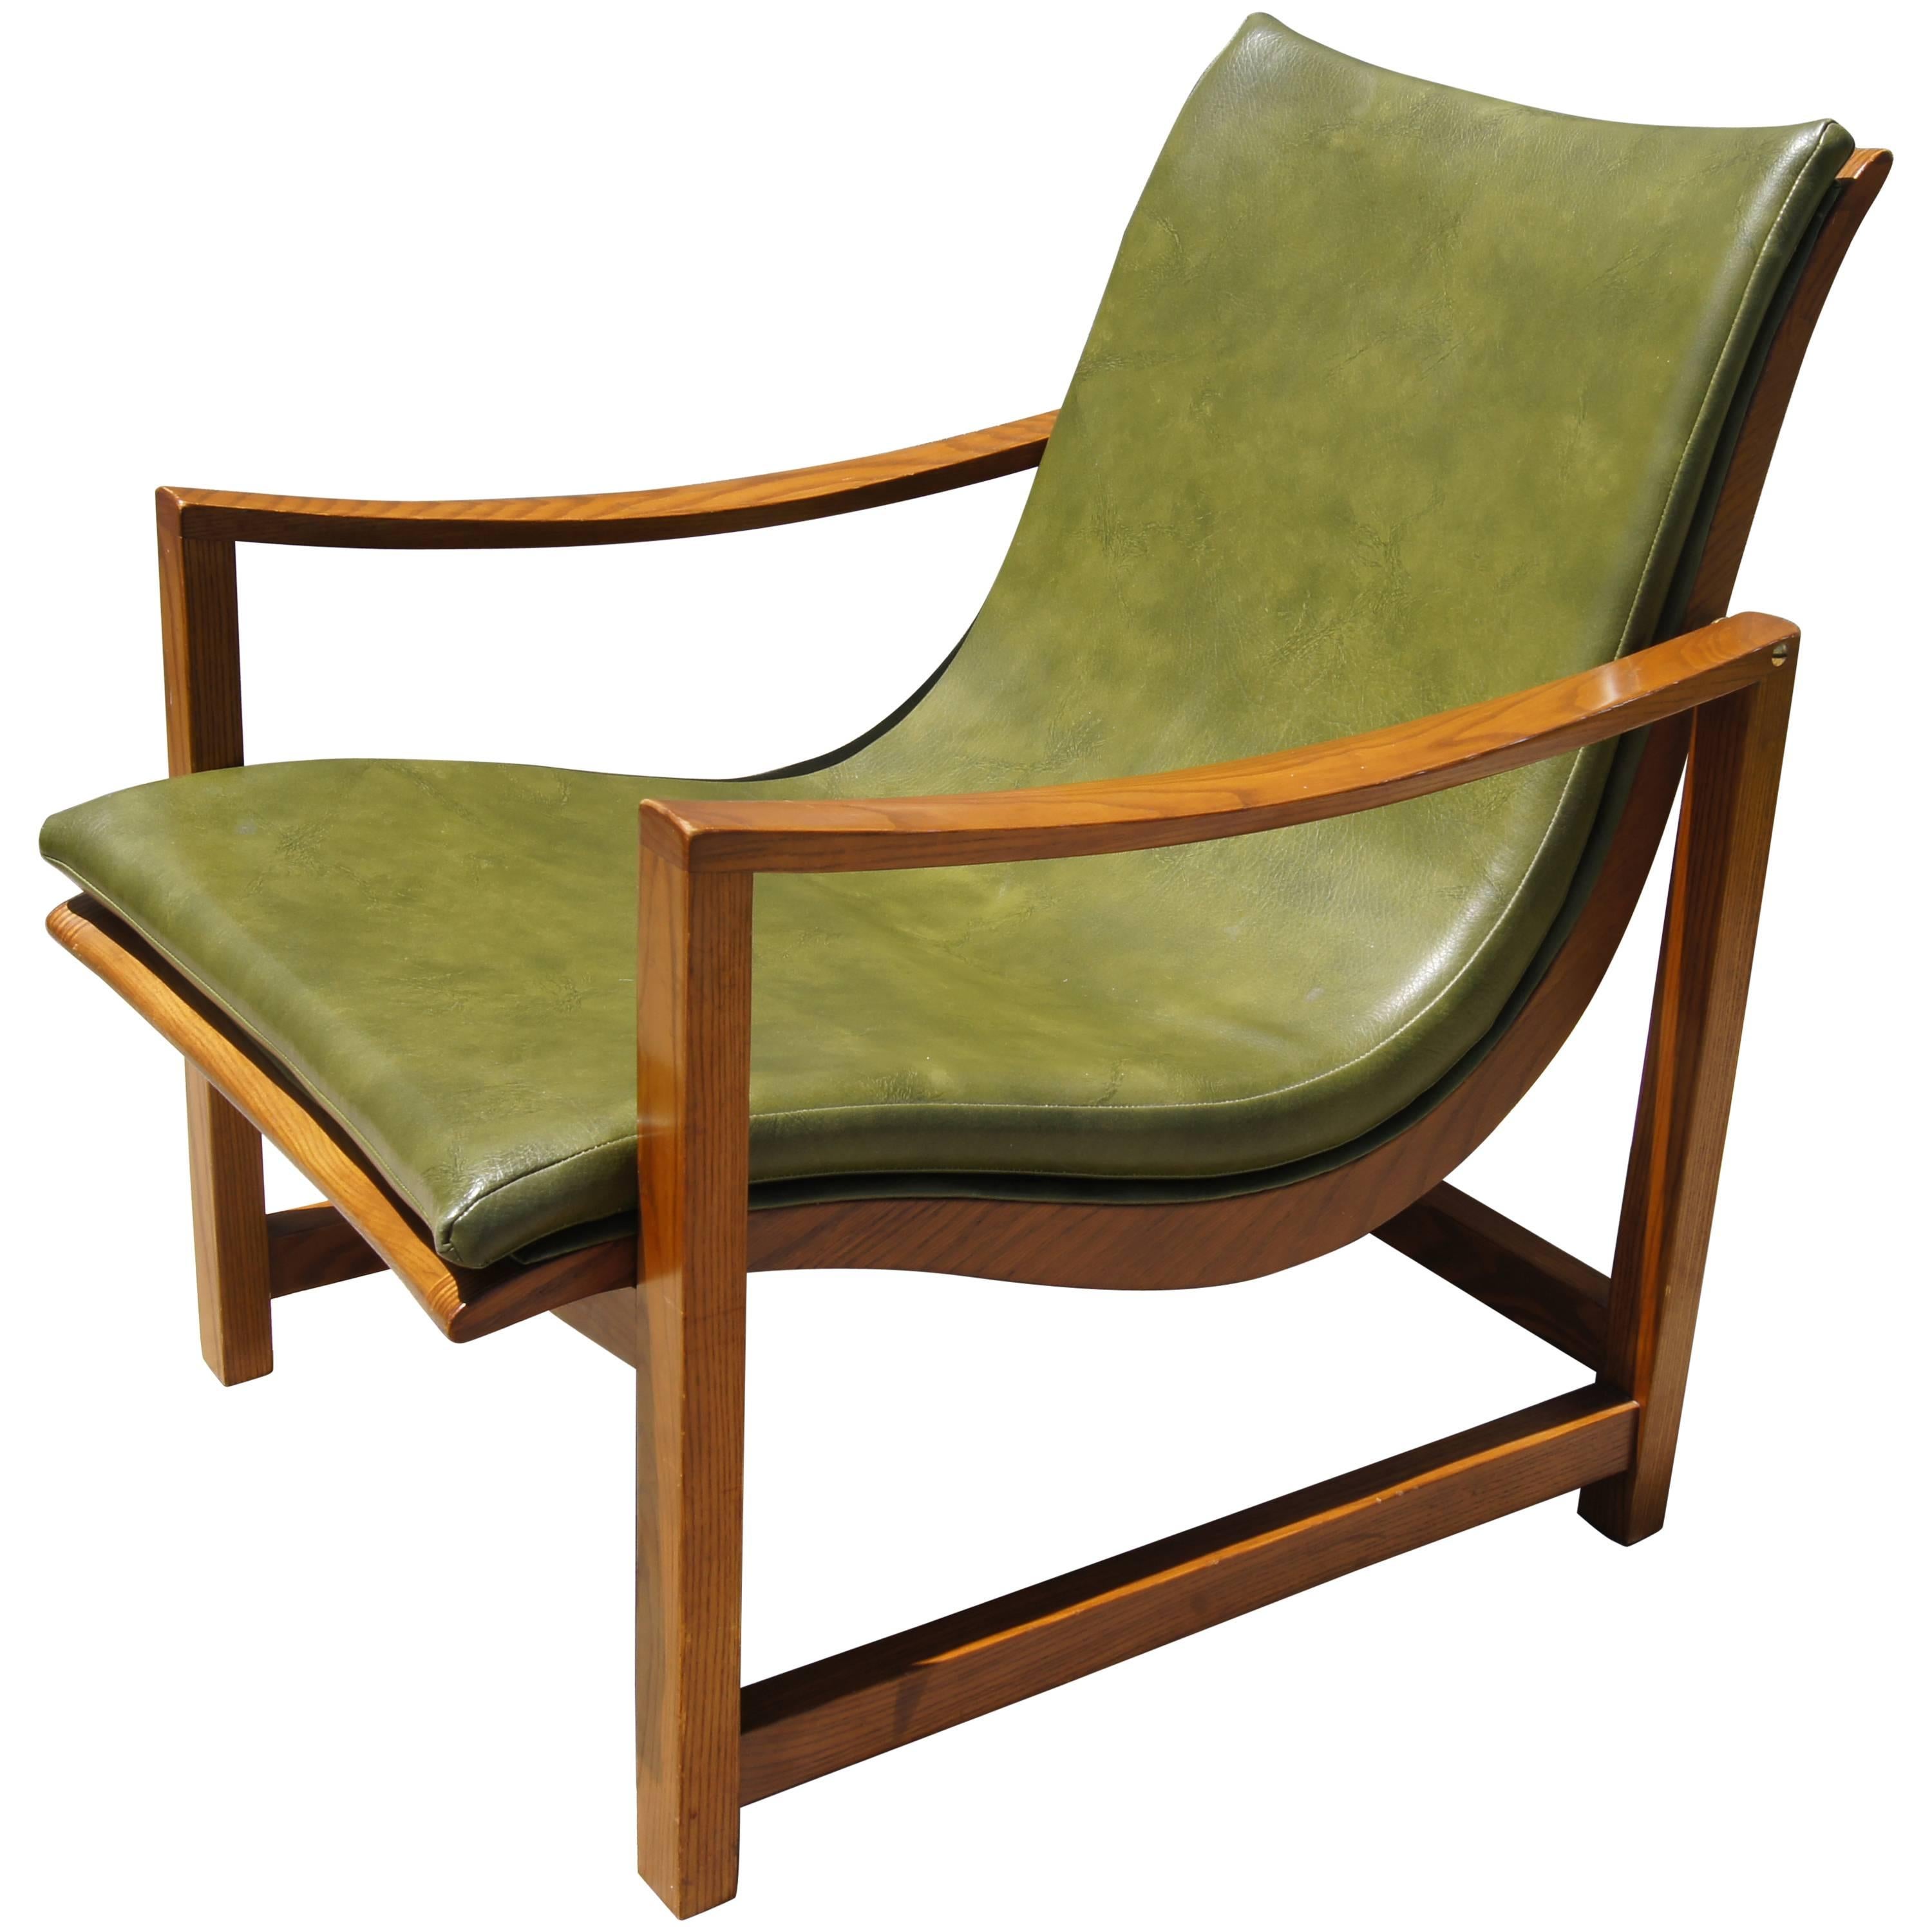 Leather-Embossed Ash Lounge Chair by Edward Wormley for Dunbar